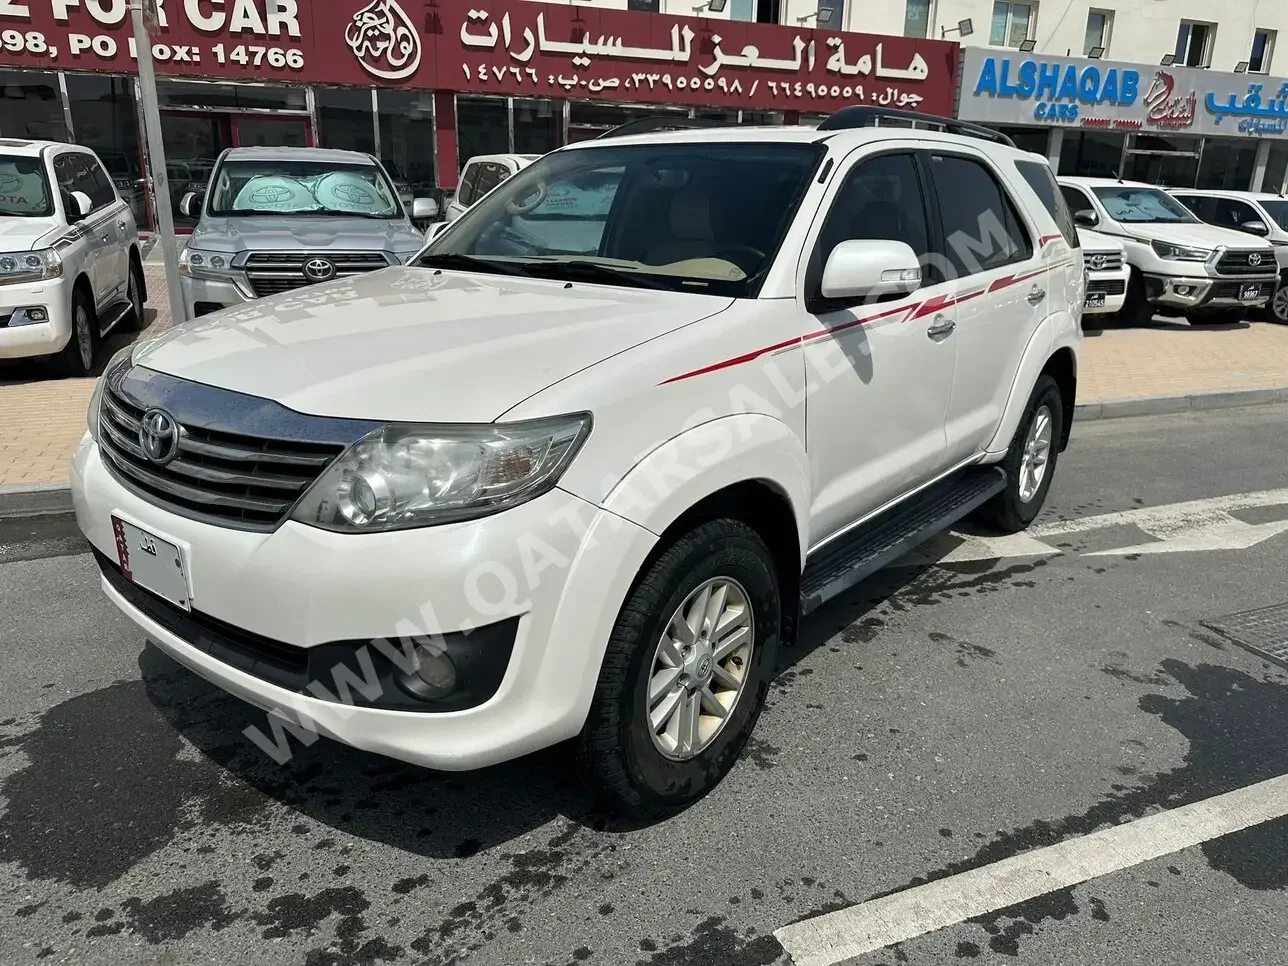 Toyota  Fortuner  SR5  2014  Automatic  187,000 Km  6 Cylinder  Four Wheel Drive (4WD)  SUV  White